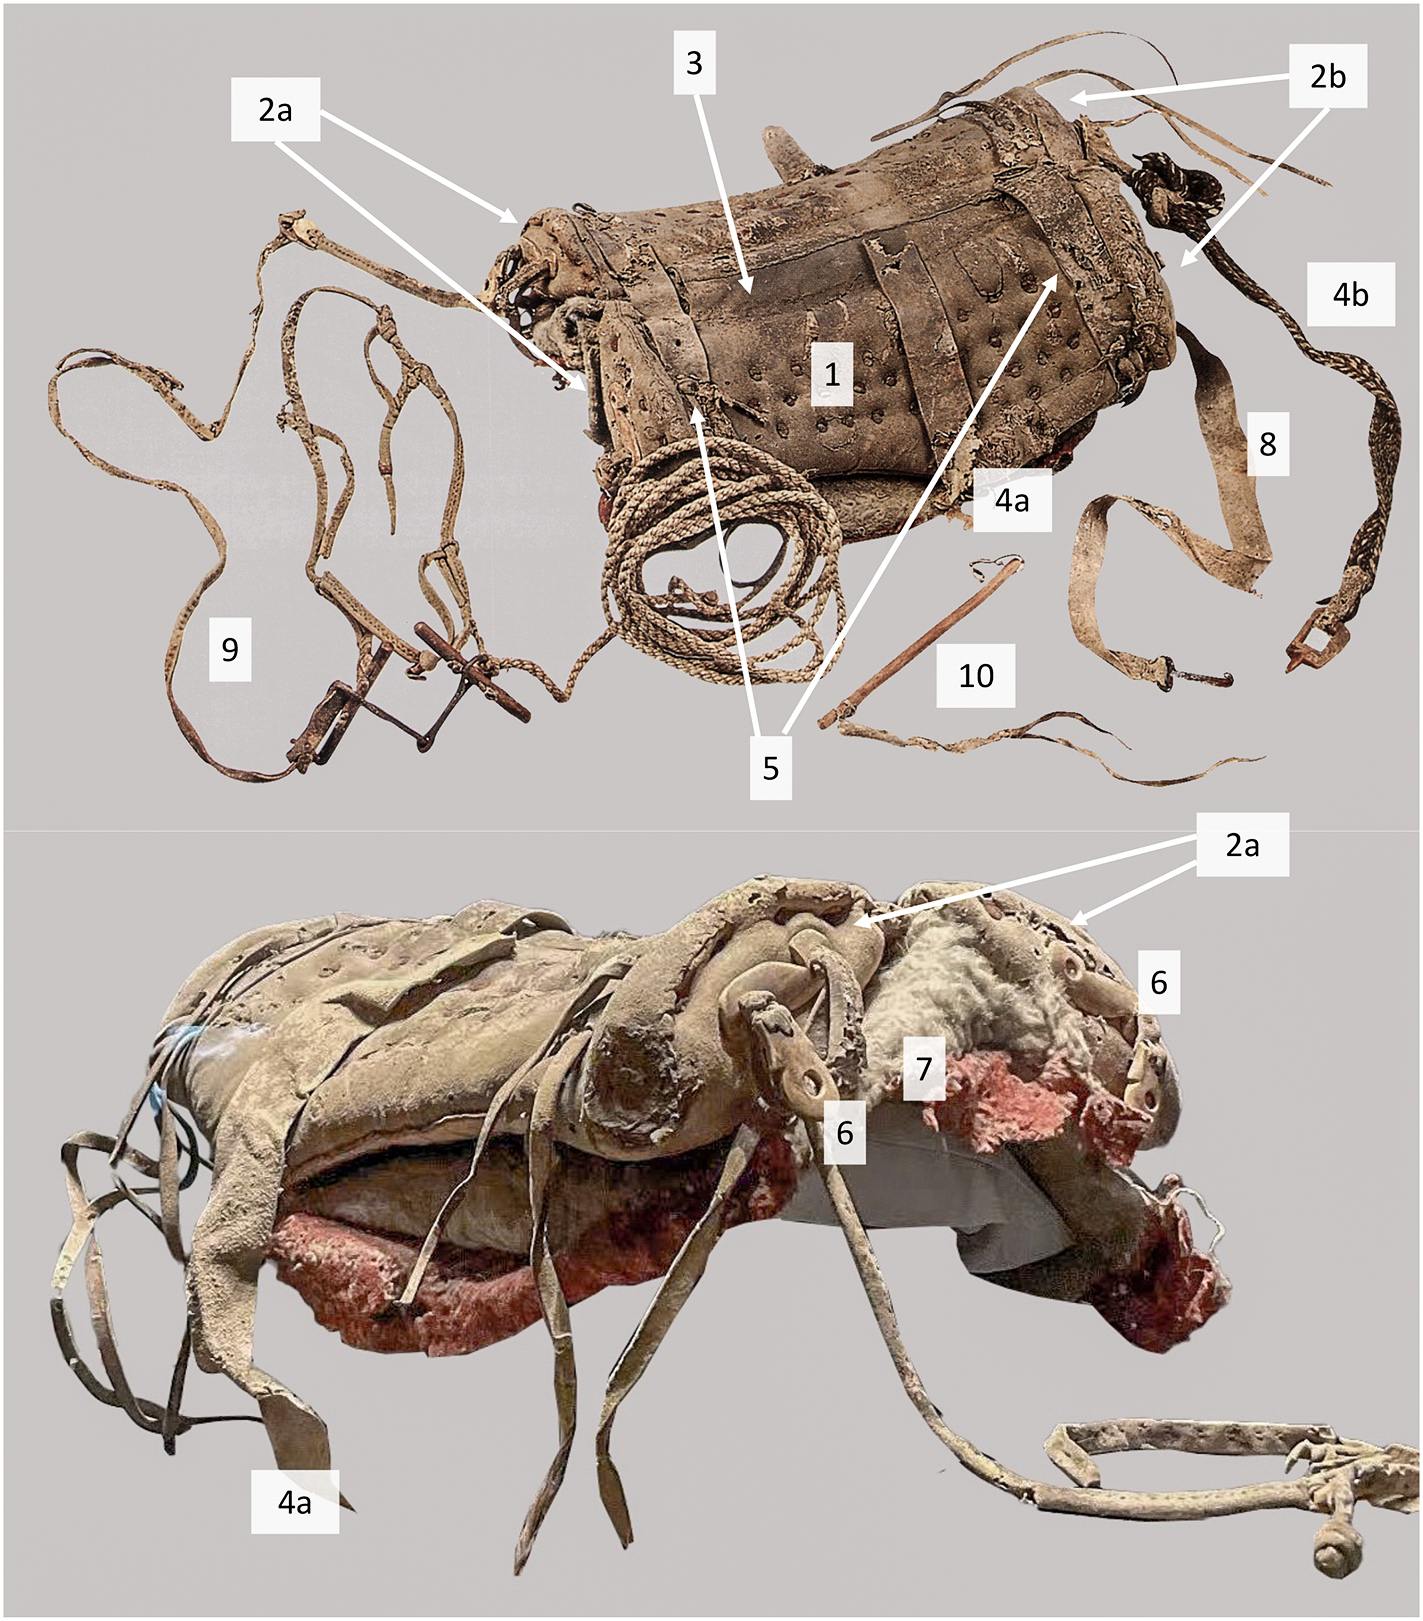 The leather saddle and bridle from Subeixi tomb M10. 1 - Saddle panel; 2a- Rear lens-shaped gussets; 2b - Front lens-shaped gussets; 3 - Gullet (flat area of leather created between the two outer stitch lines when panels were joined); 4a - Girth, leather part; 4b - Girth, plaited horse hair strap; 5 - Connecting straps; 6 - Bone attachments (front); 7 - Felt pad; 8 - Crupper; 9 - Bridle; 10 - Whip.